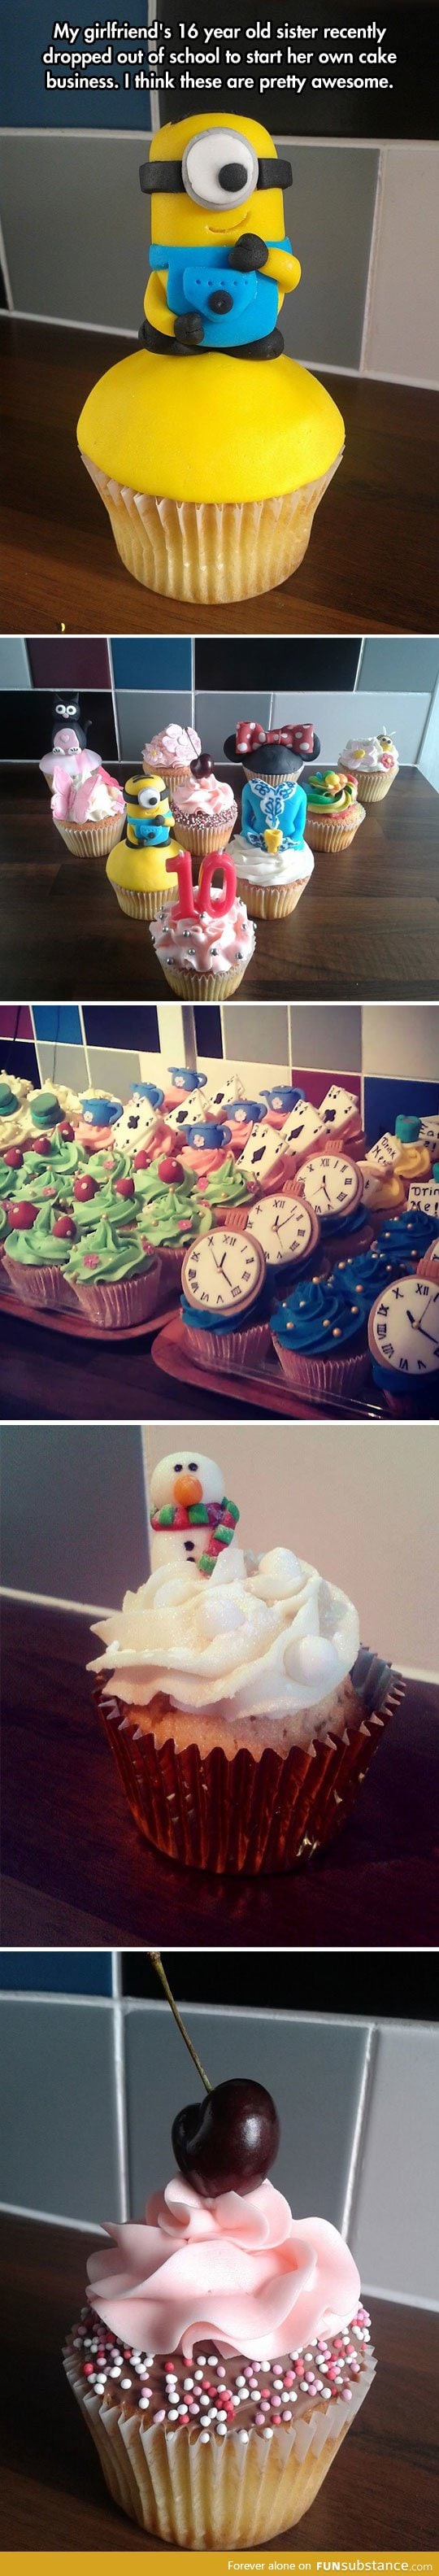 Amazing cup cake designs